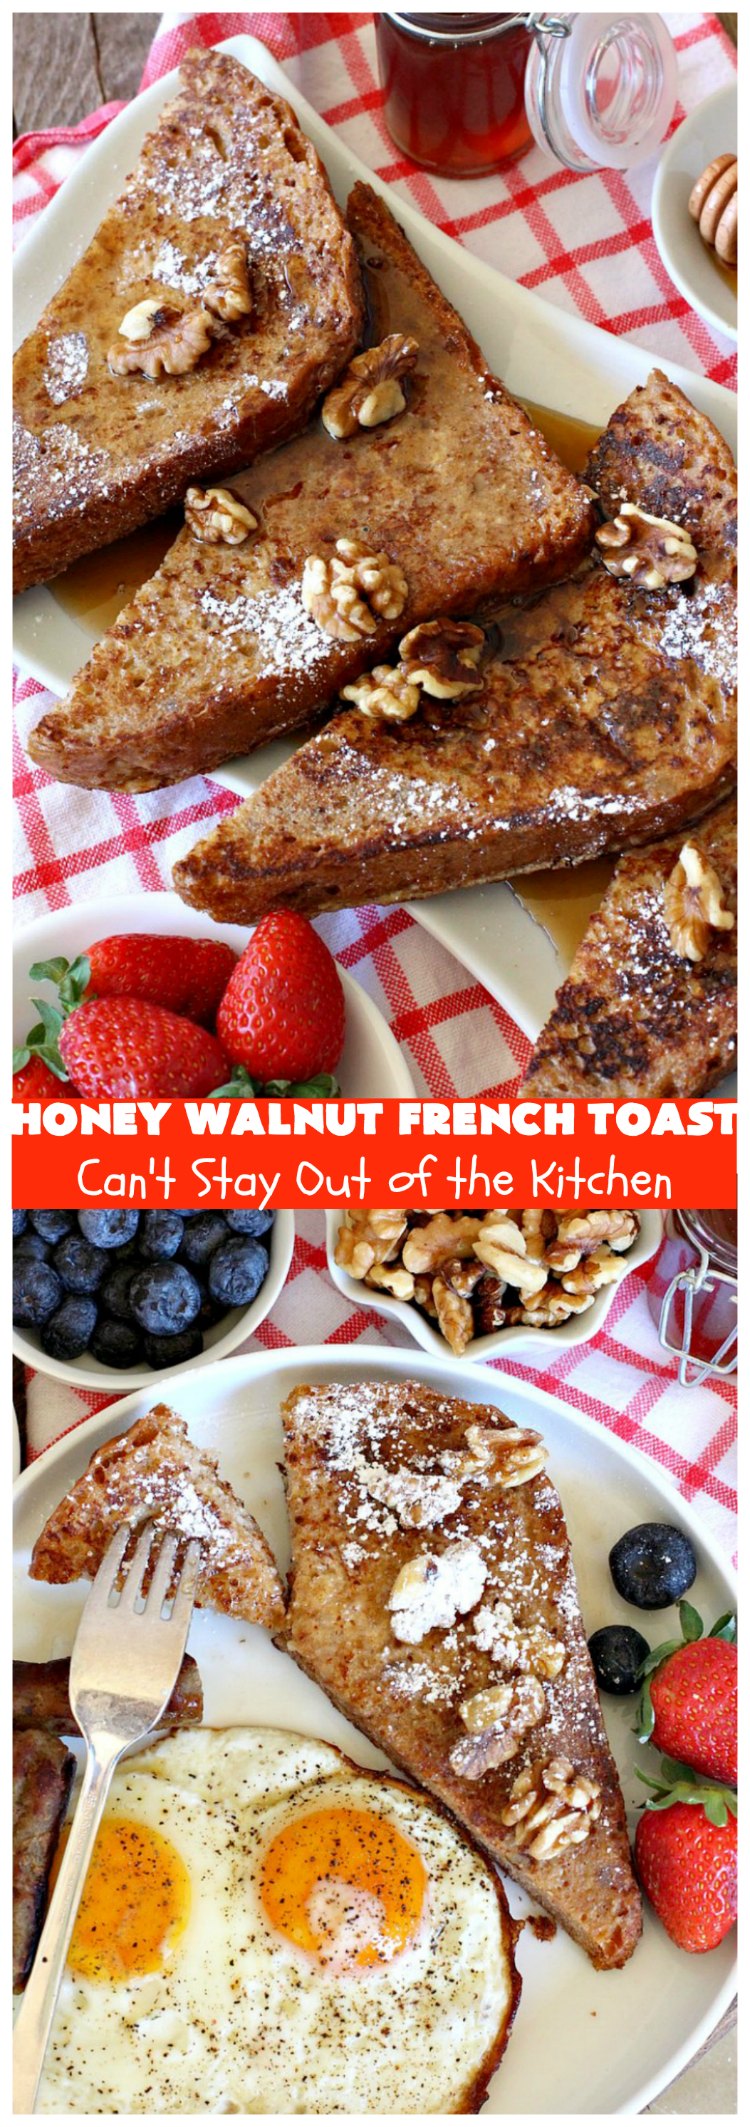 Honey Walnut French Toast | Can't Stay Out of the Kitchen